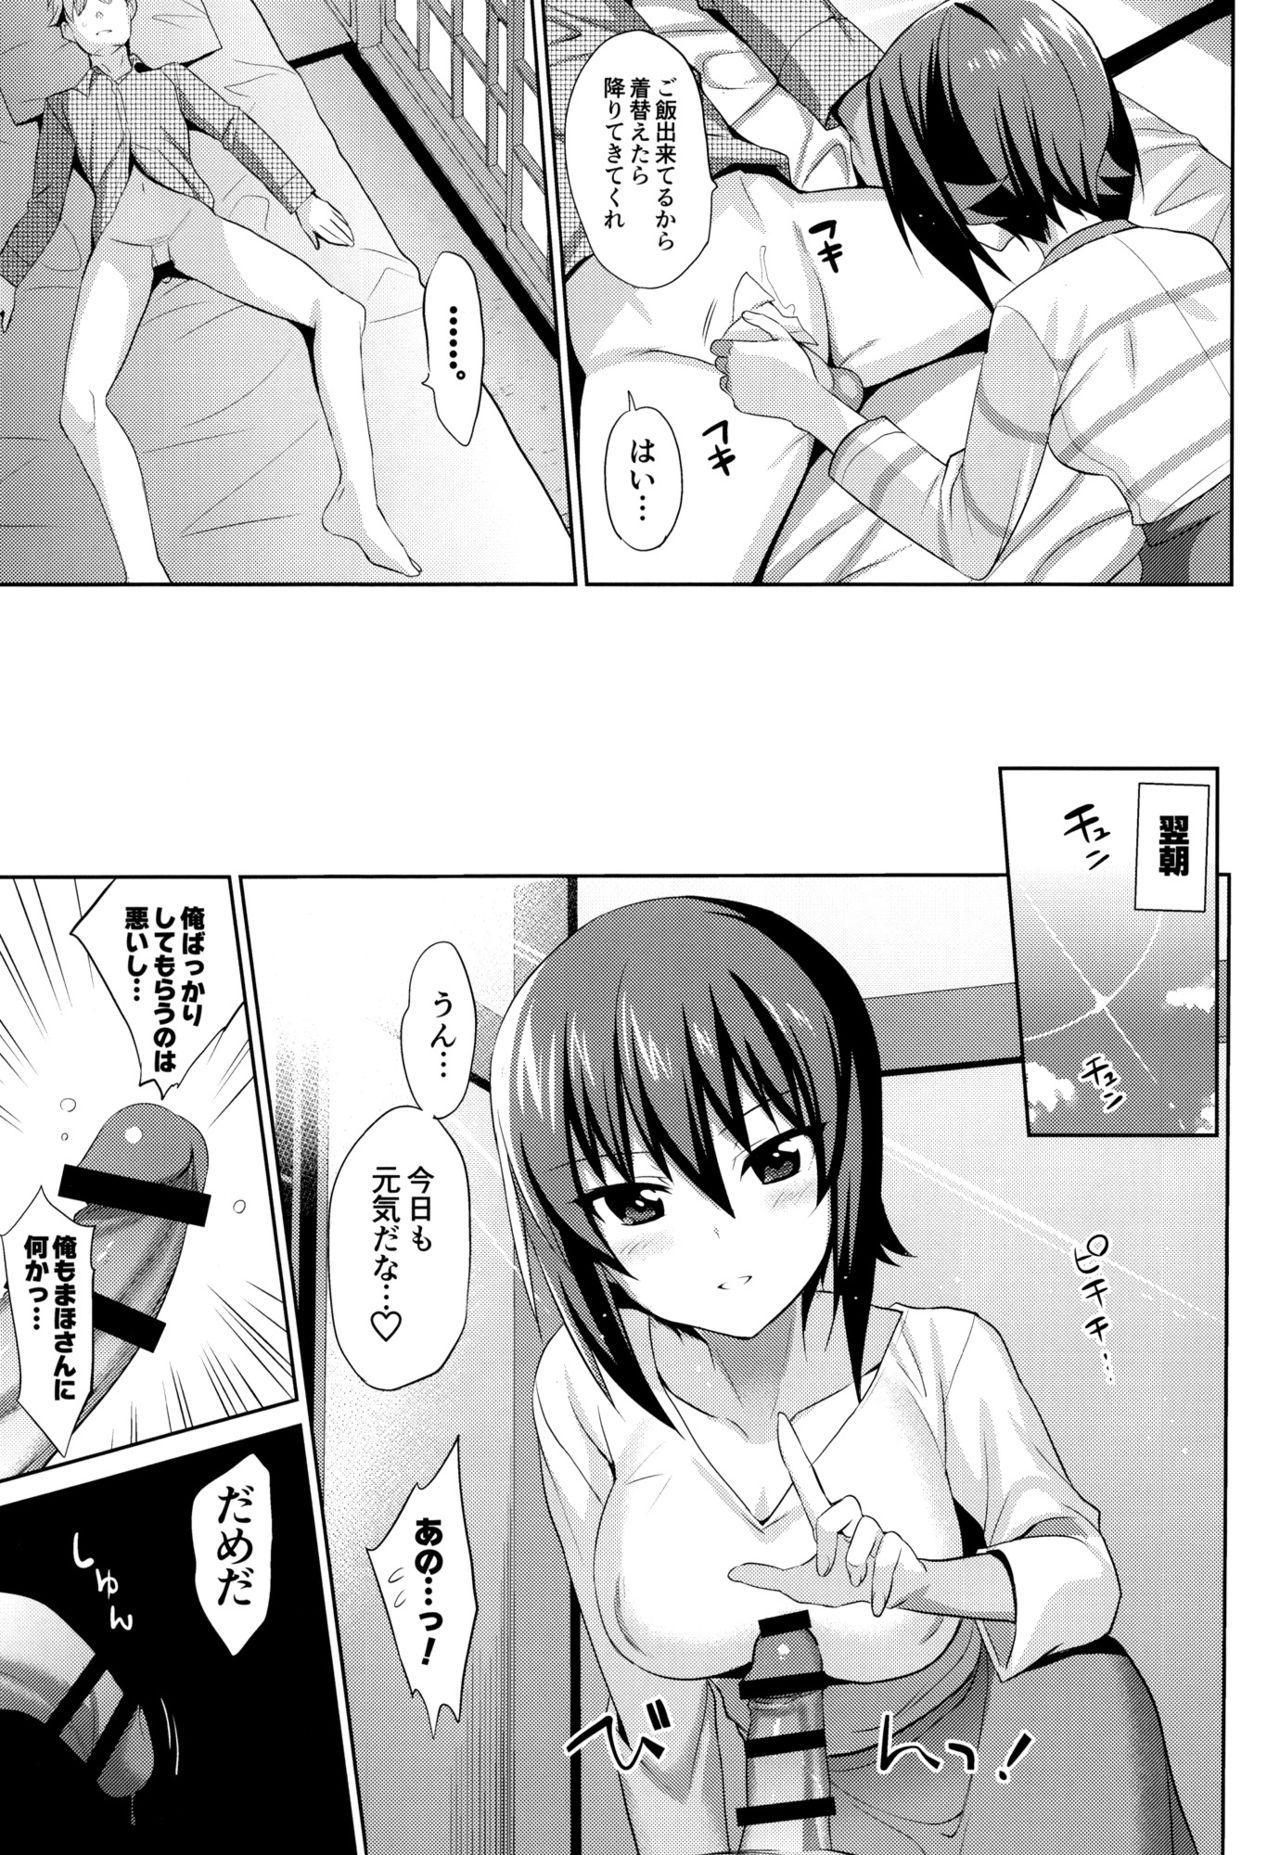 Pmv LET ME LOVE YOU TOO - Girls und panzer Fishnet - Page 10